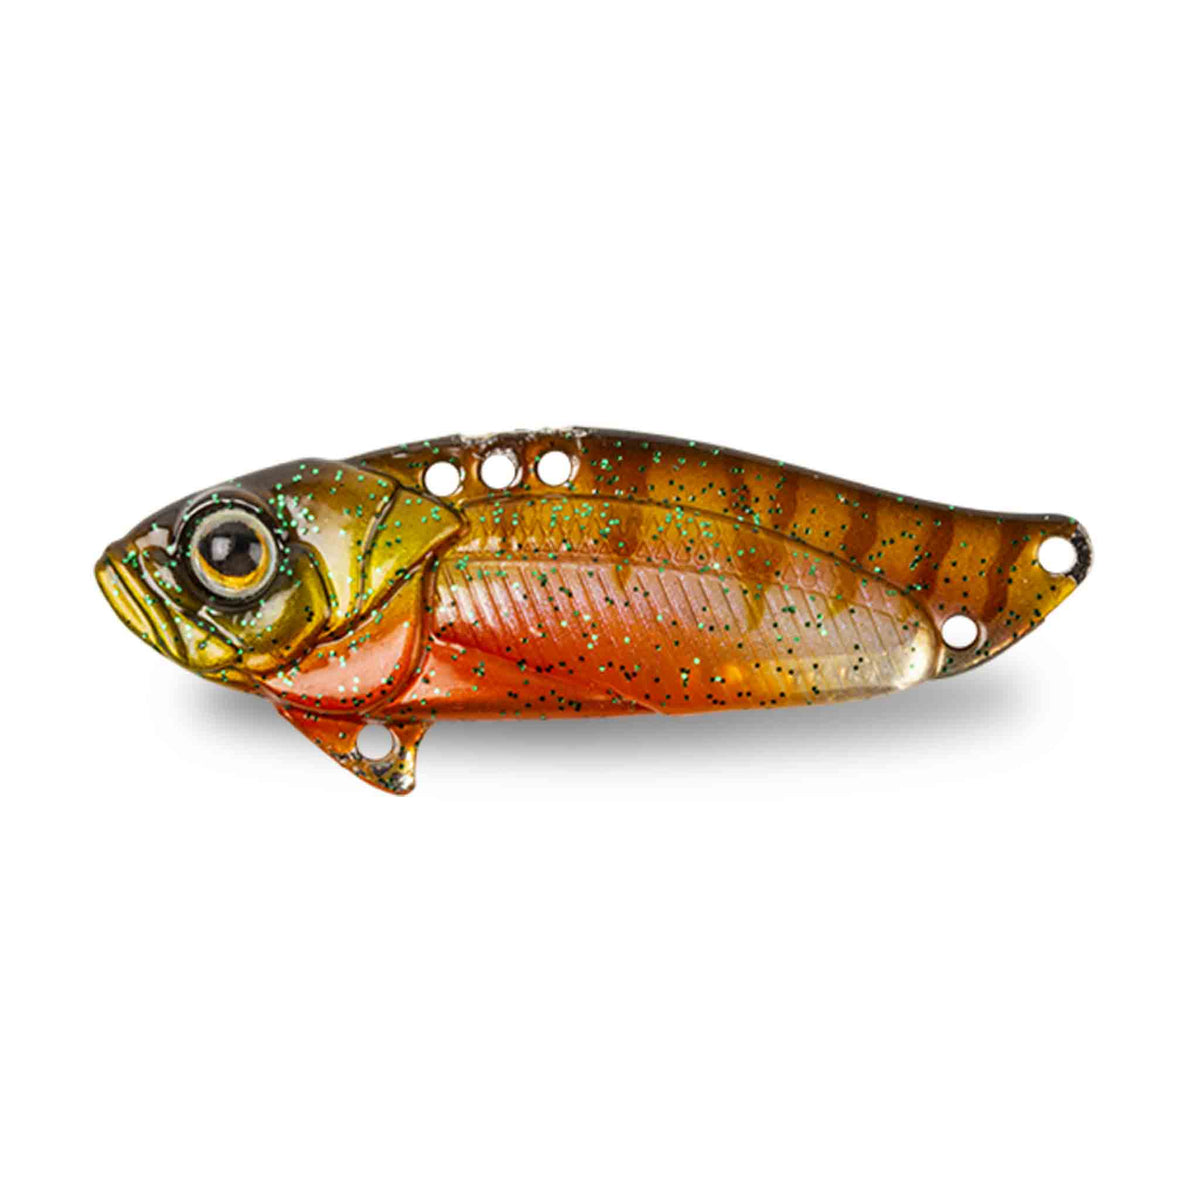 LIPLESS CRANKBAITS - Everything You Need To Know! (Beginner To